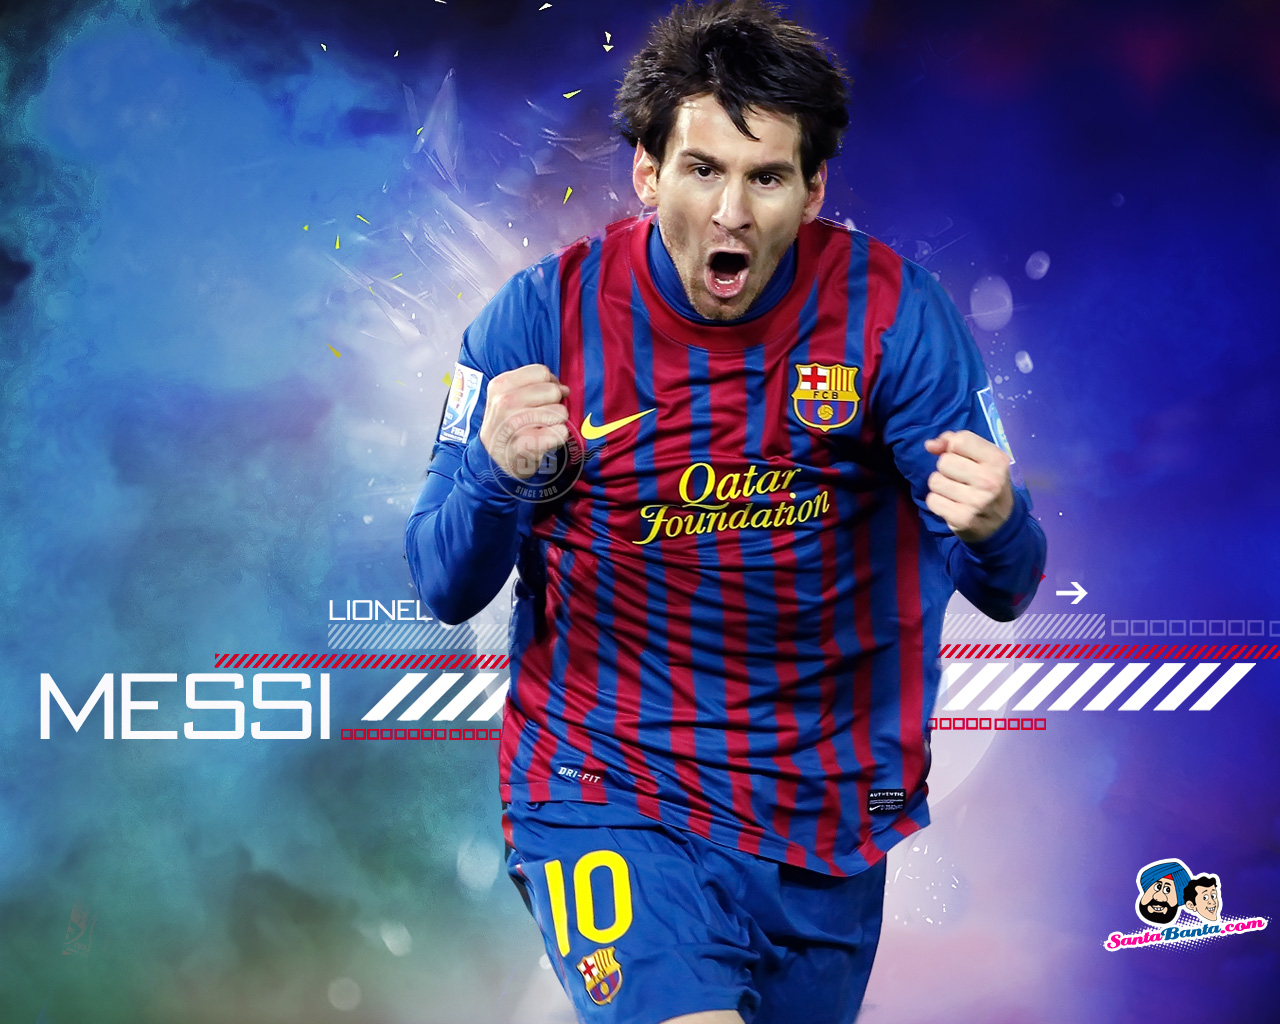  other wallpapers of Lionel Messi wallpapers as often as possible